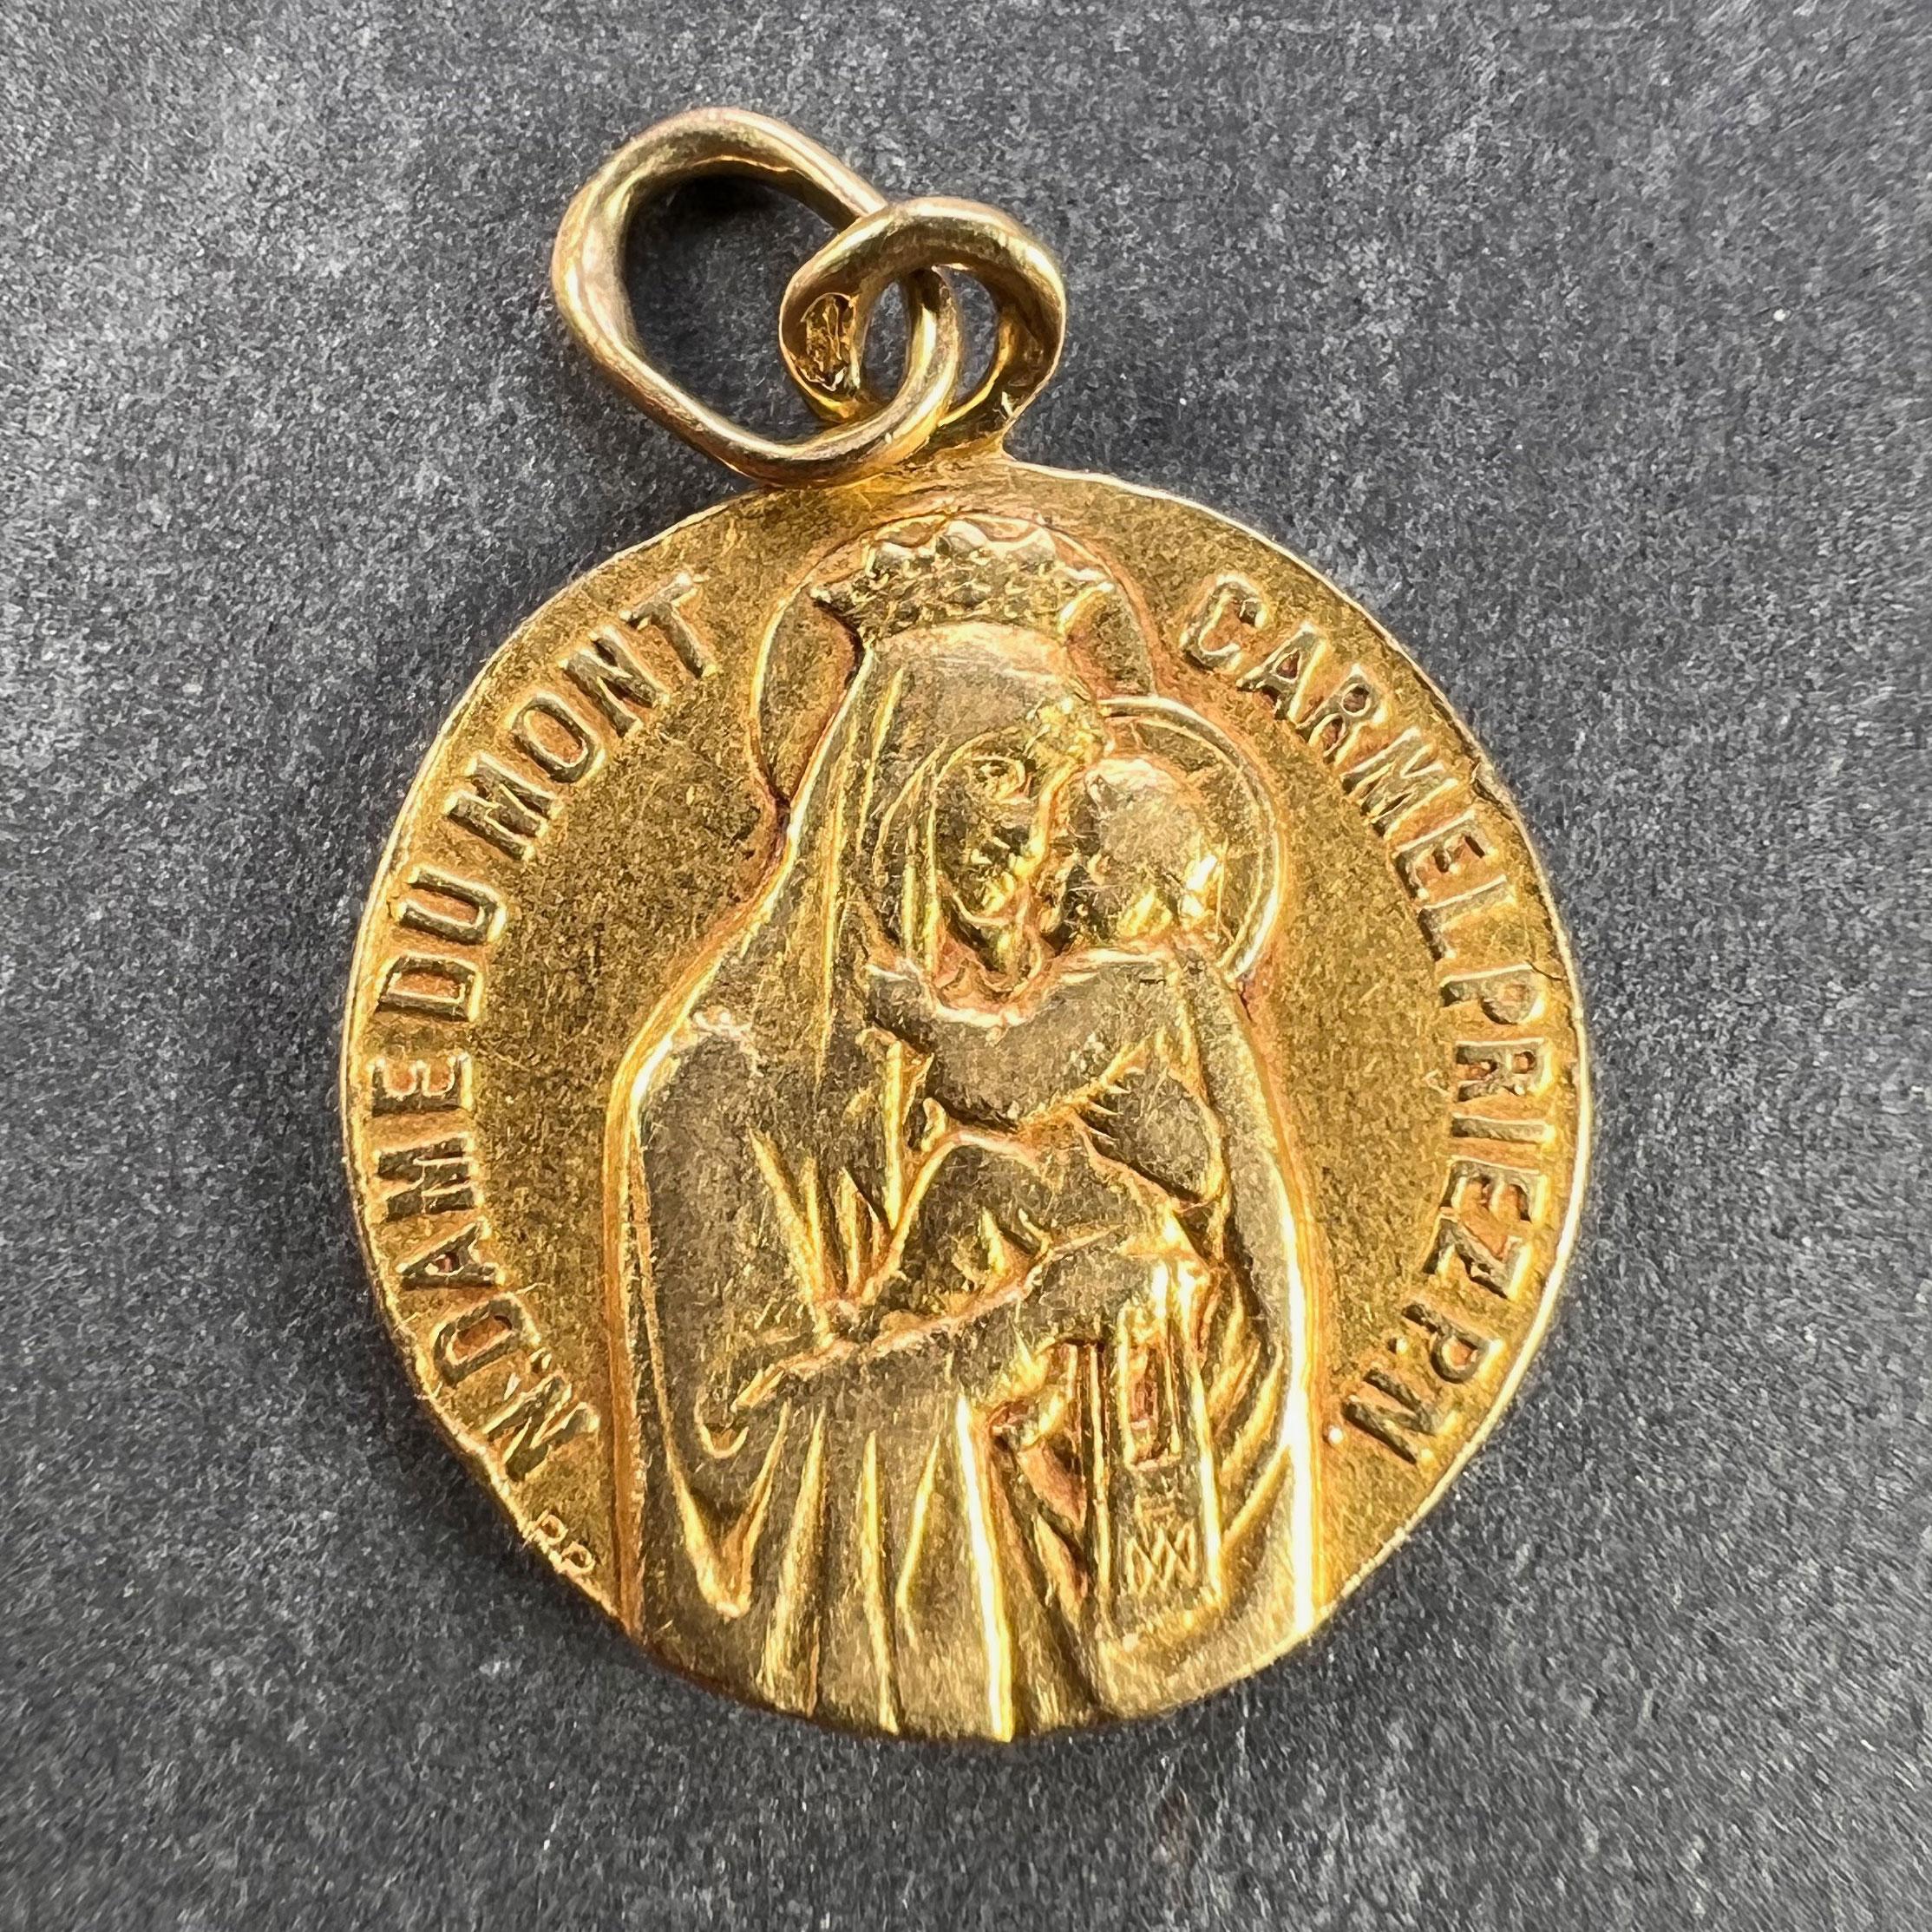 An 18 karat (18K) yellow gold charm pendant designed as a medal depicting the Madonna and Child with the phrase ‘N.Dame (Notre Dame) Du Mont Carmel Priez PN (Pour Nous)’ (trans. Our Lady of Mount Carmel Pray for Us) around the edge. 

The reverse